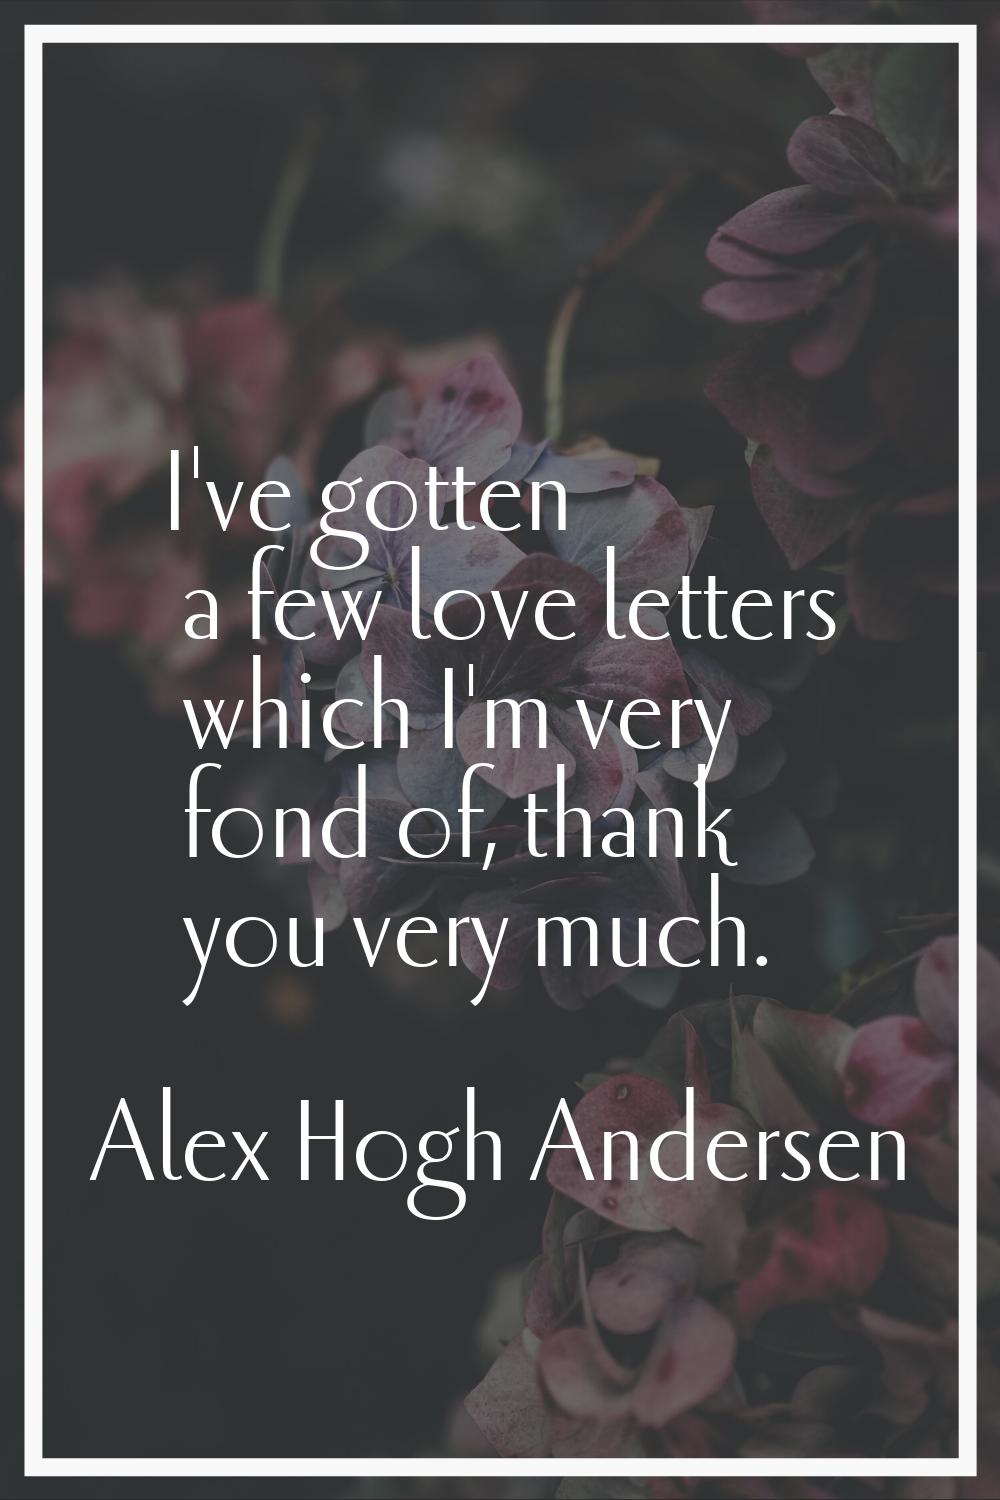 I've gotten a few love letters which I'm very fond of, thank you very much.